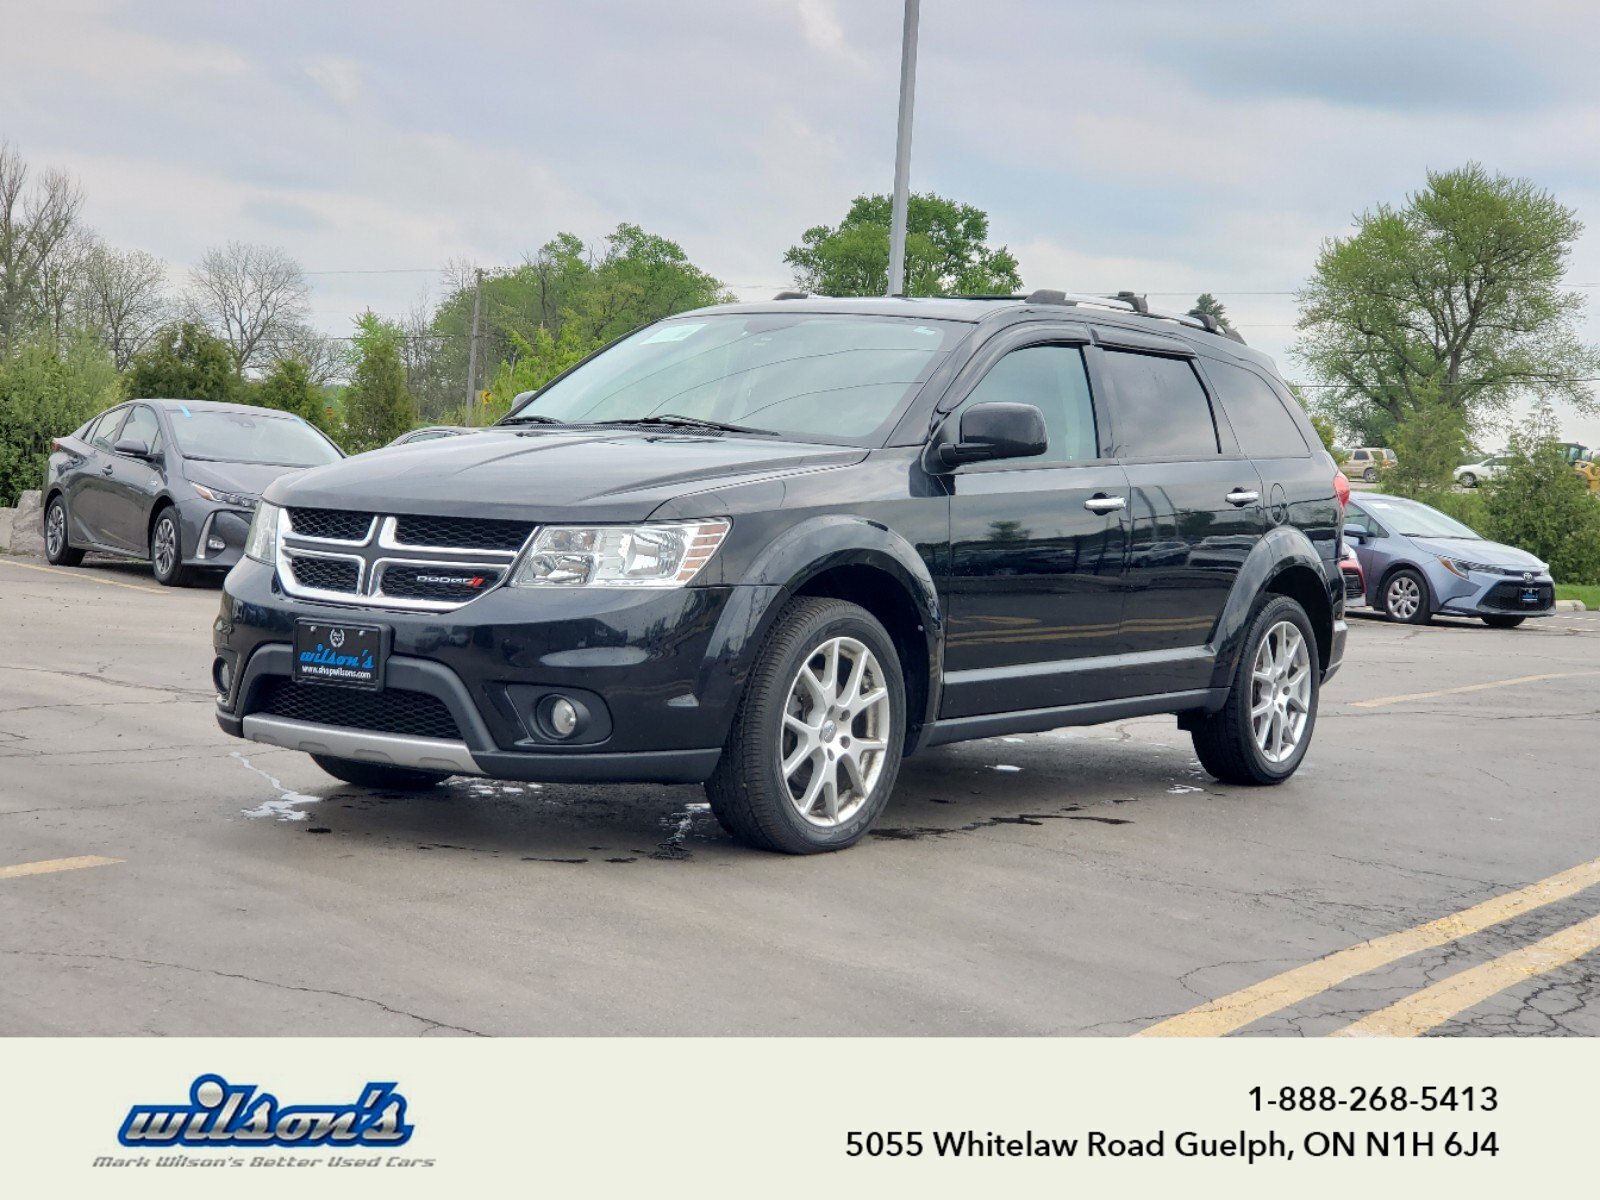 2017 Dodge Journey GT AWD - 7-passenger, Heated Leather, Reverse Came